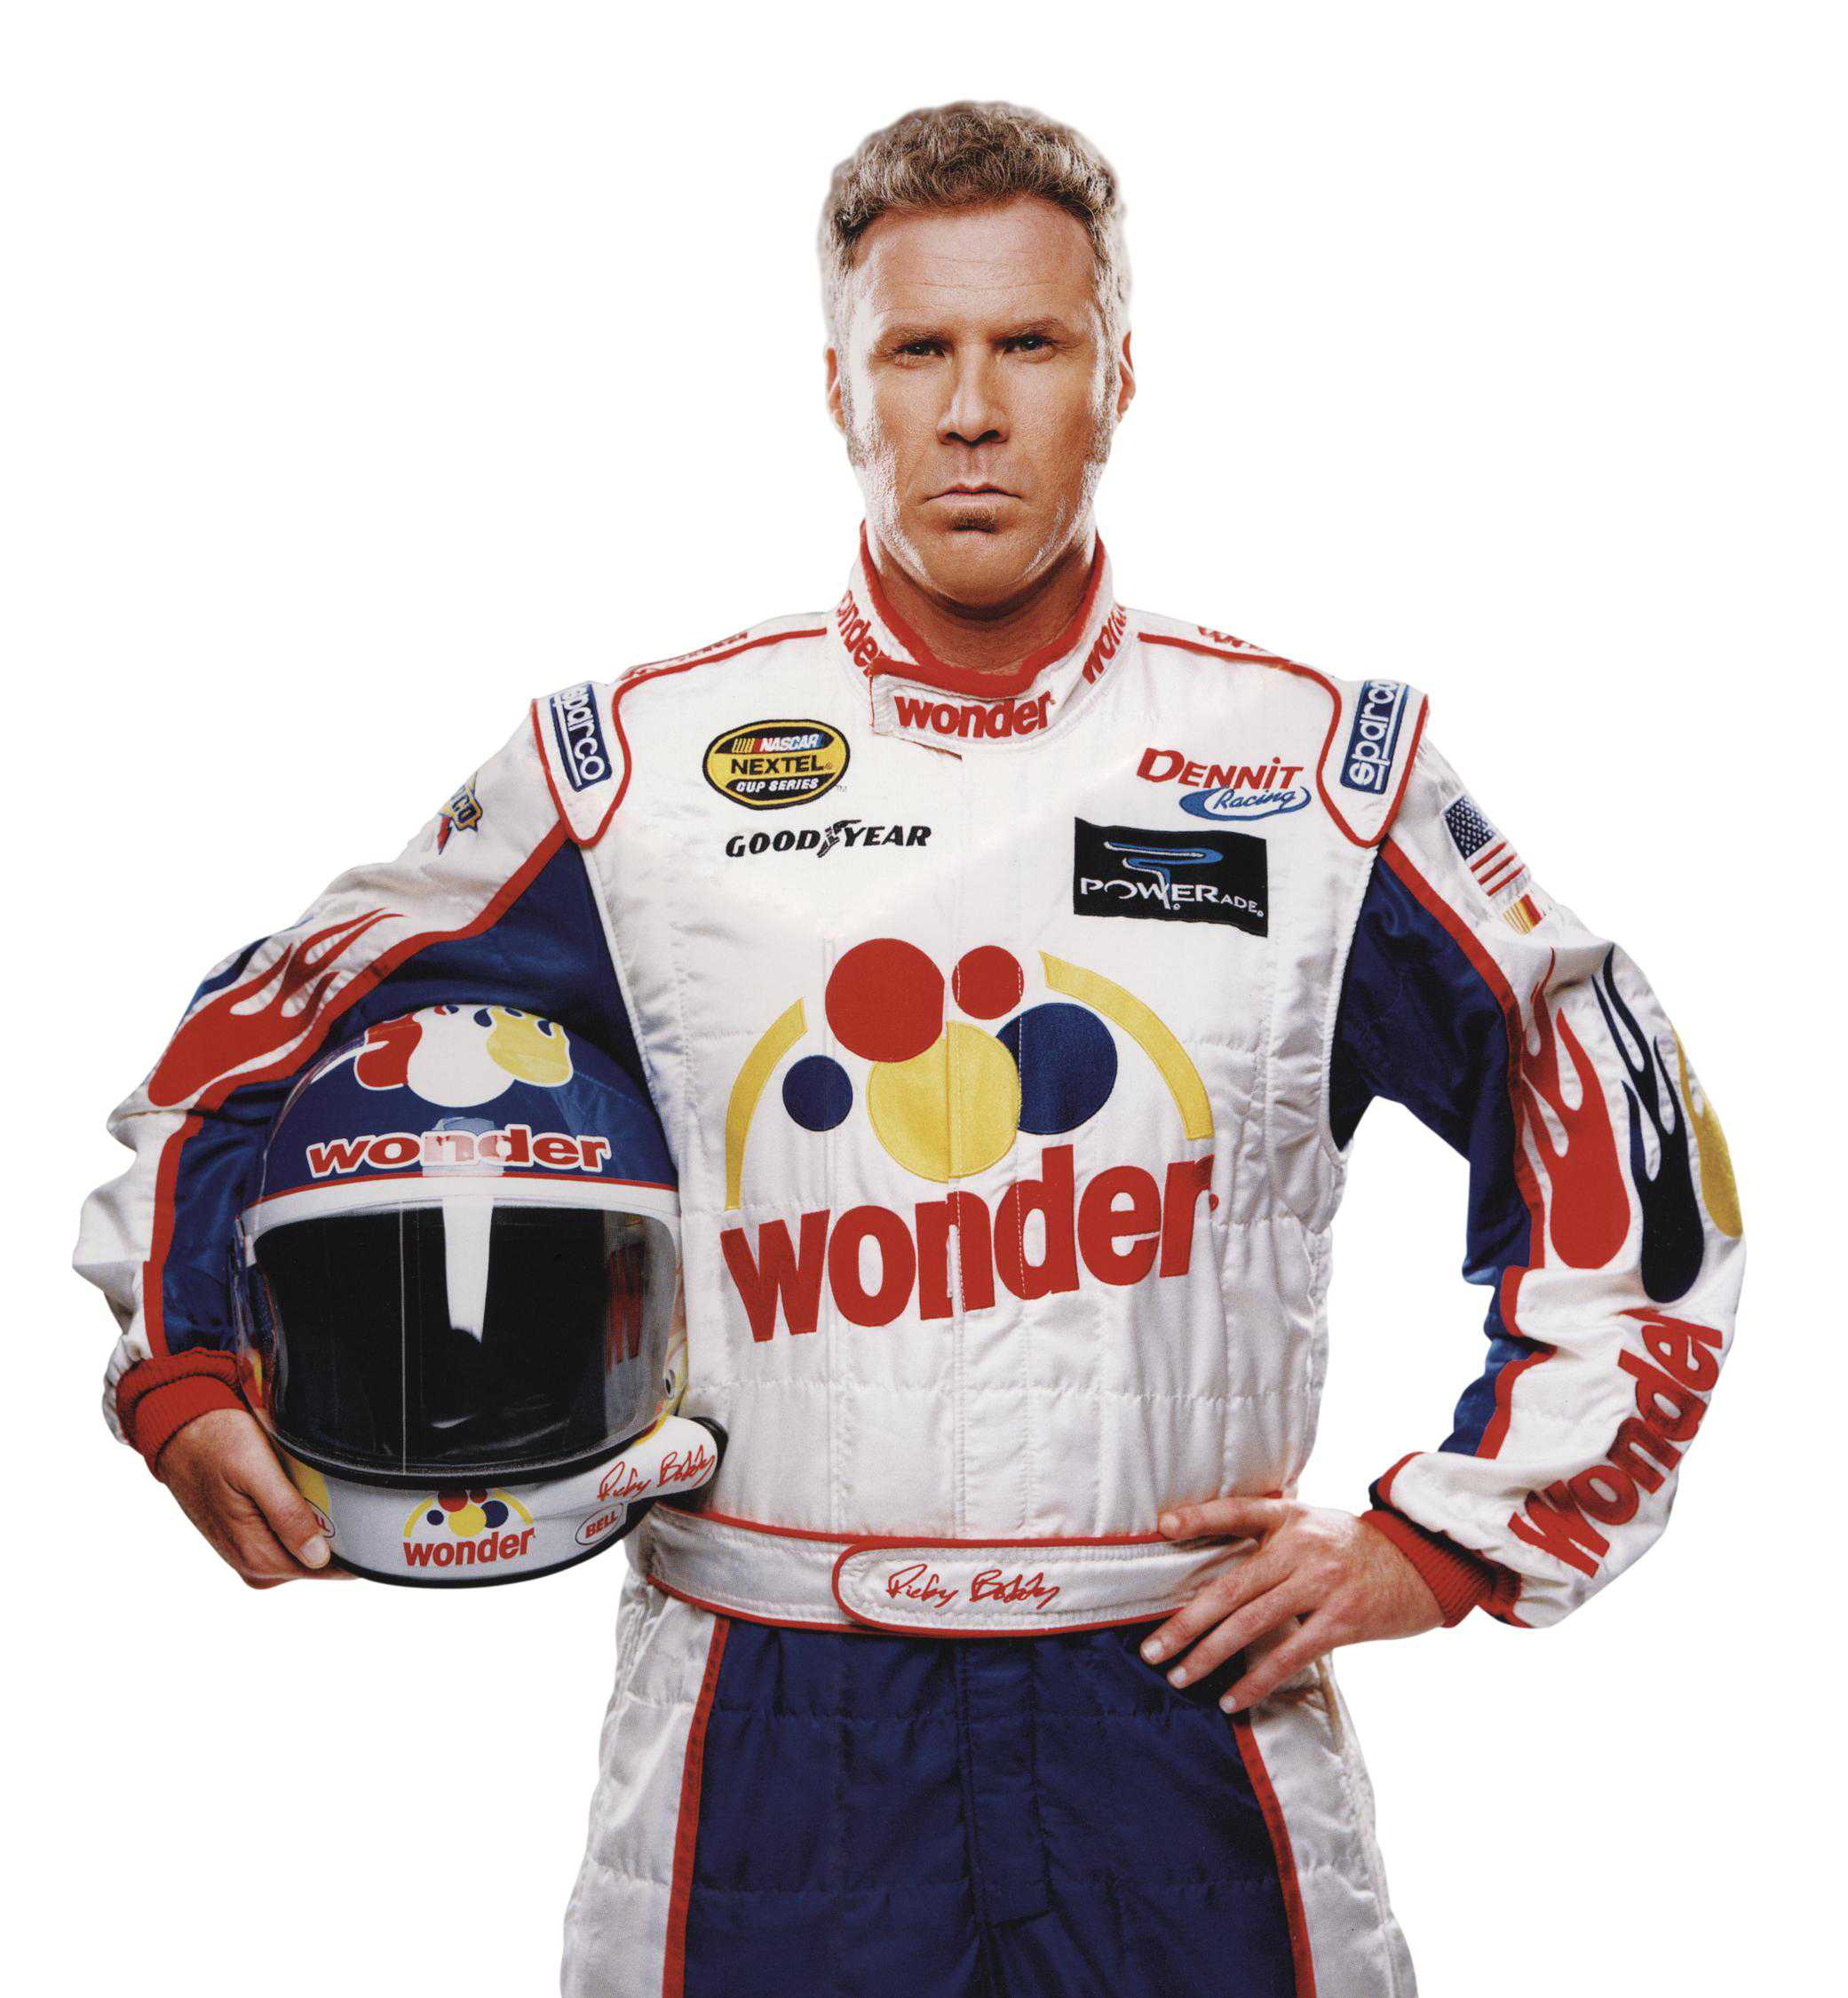 Ballad Of Ricky Bobby Quotes. QuotesGram